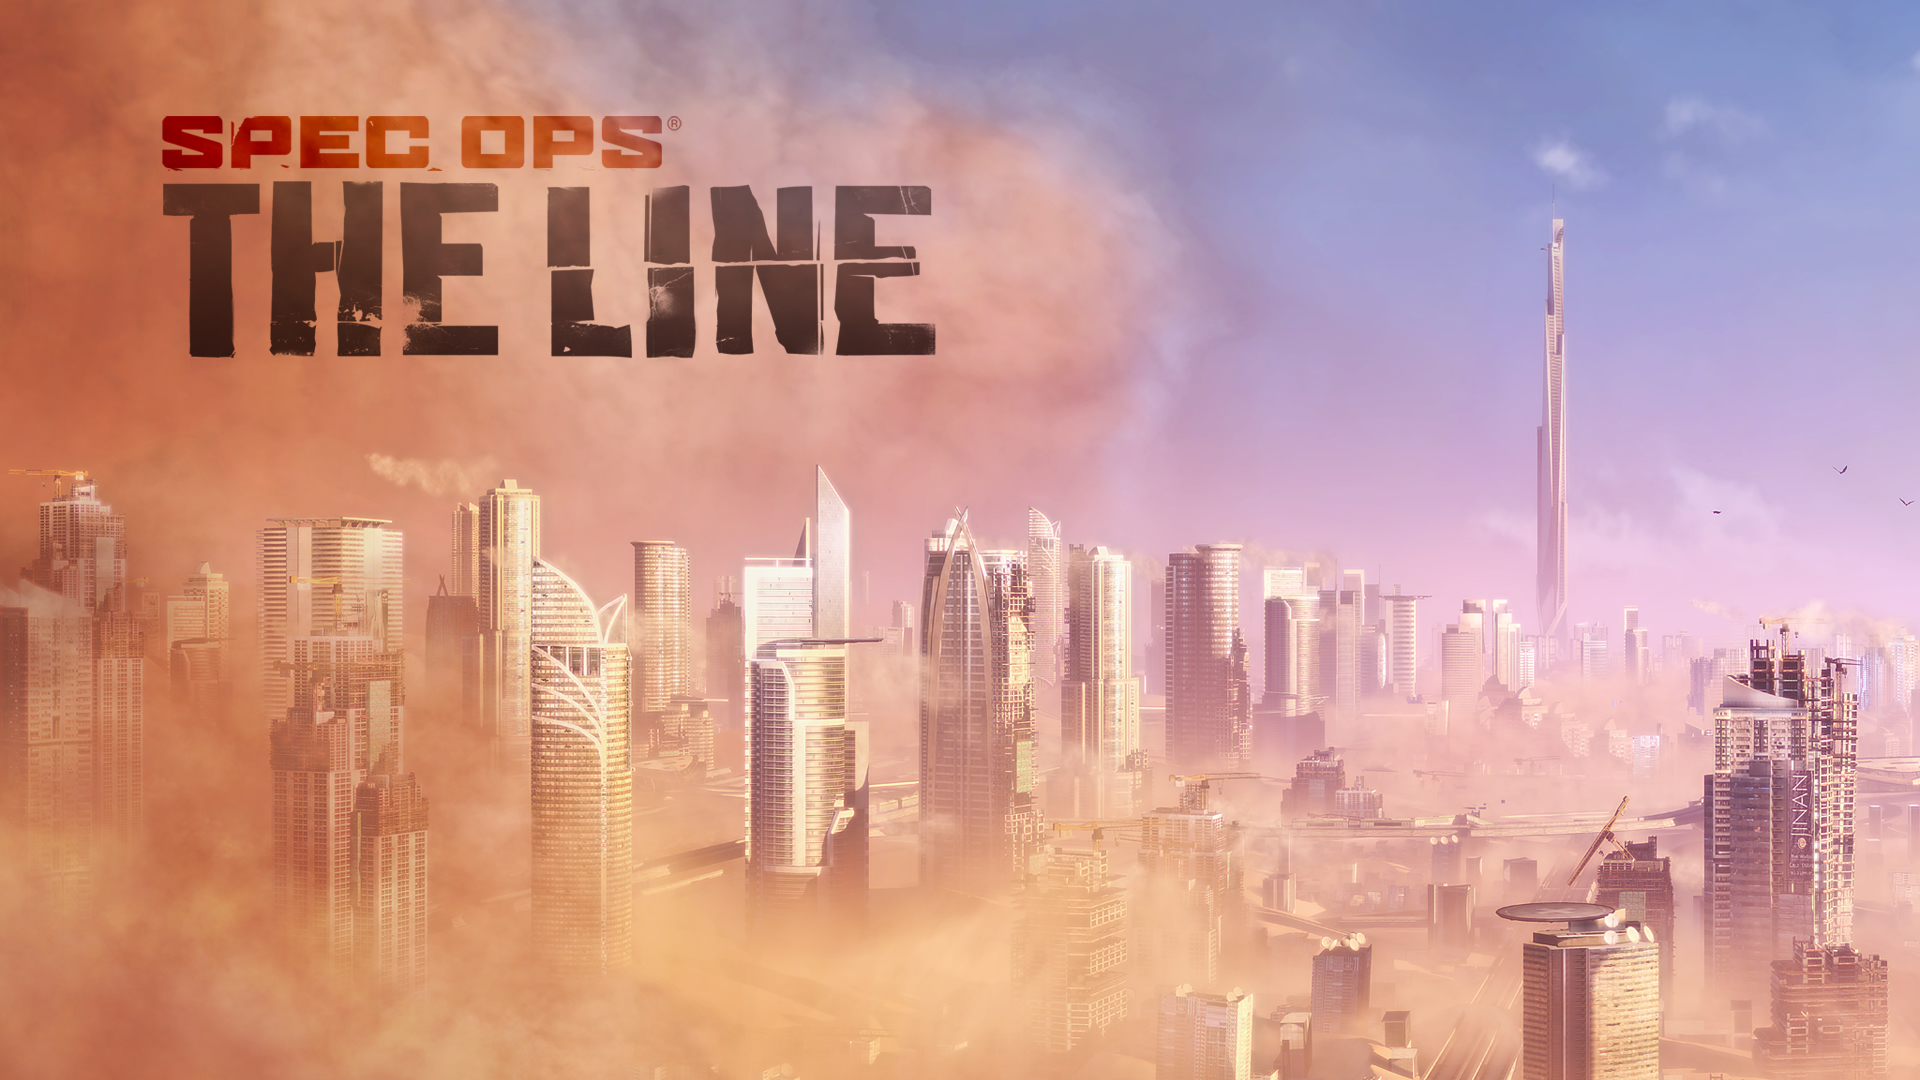 Wallpaper Of Spec Ops The Line You Are Ing